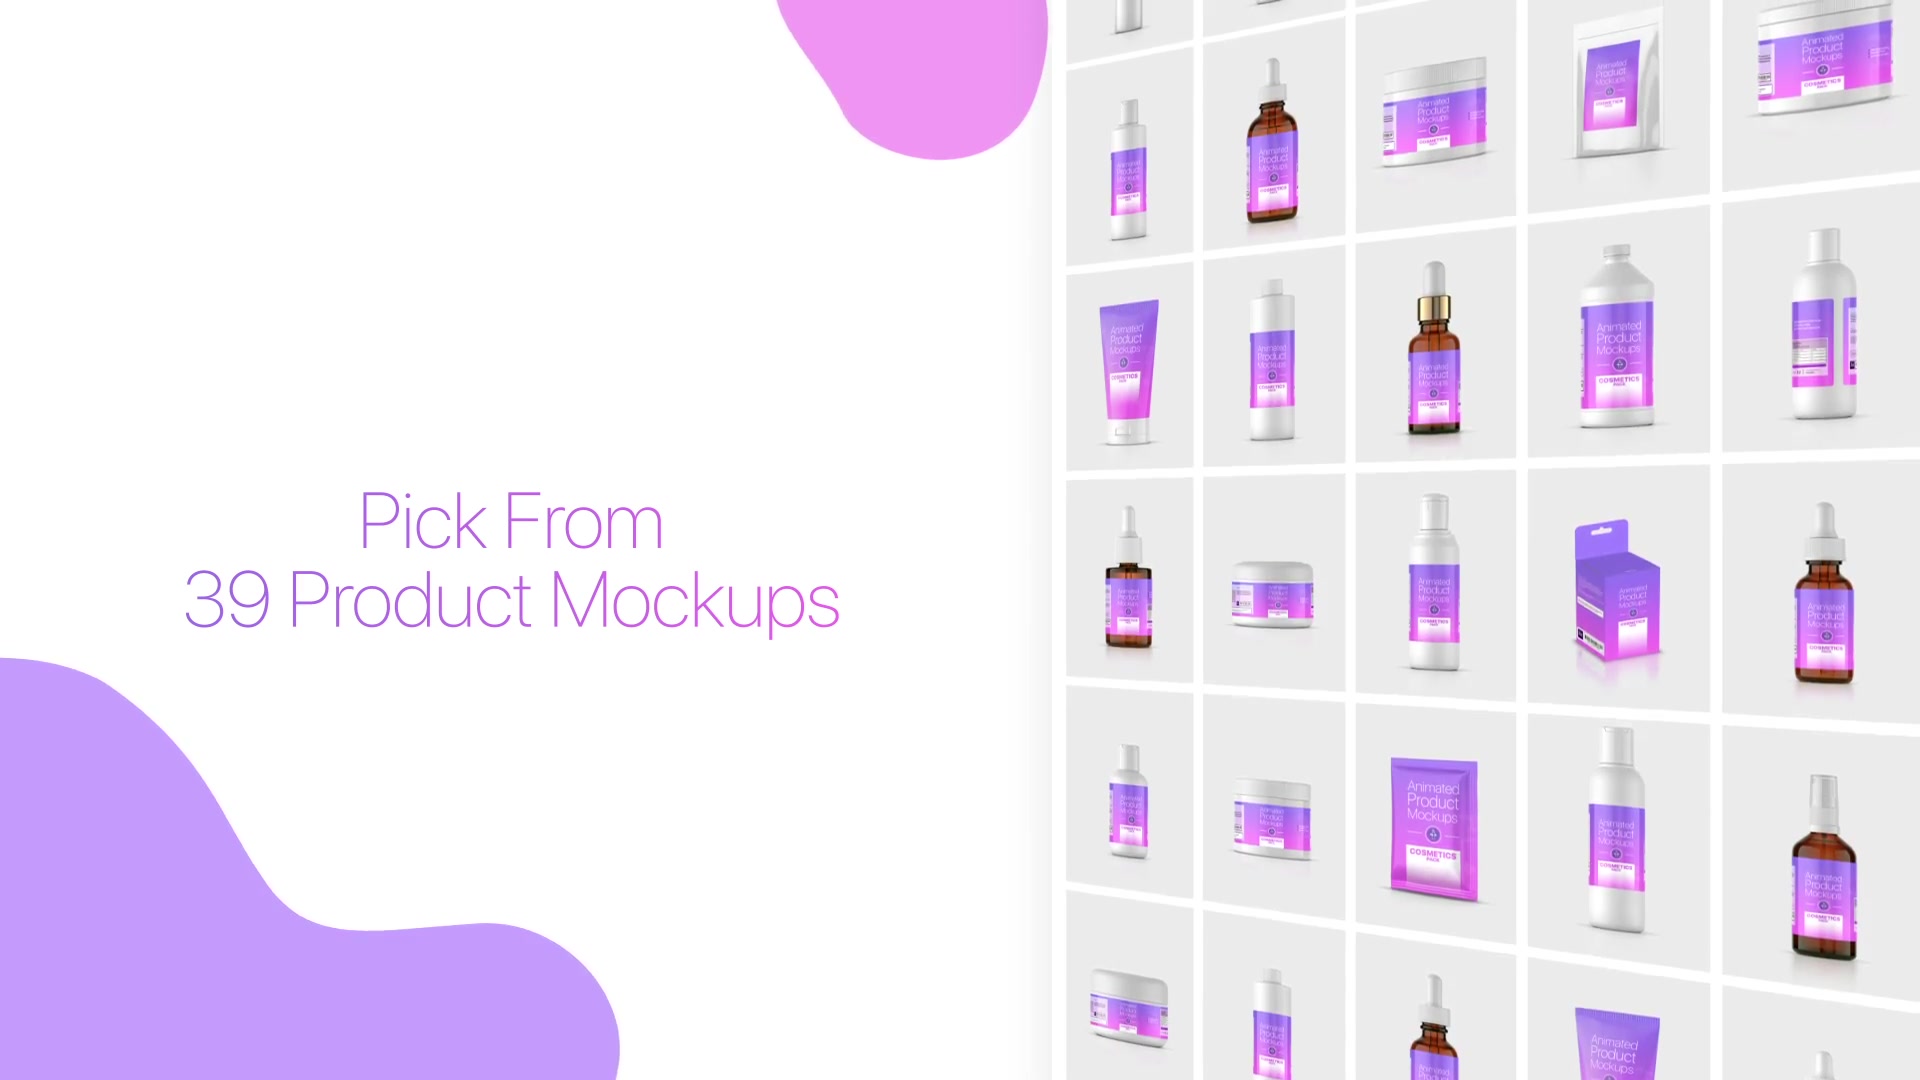 Download Animated Product Mockups Cosmetics Pack Videohive 25513188 Download Quick After Effects